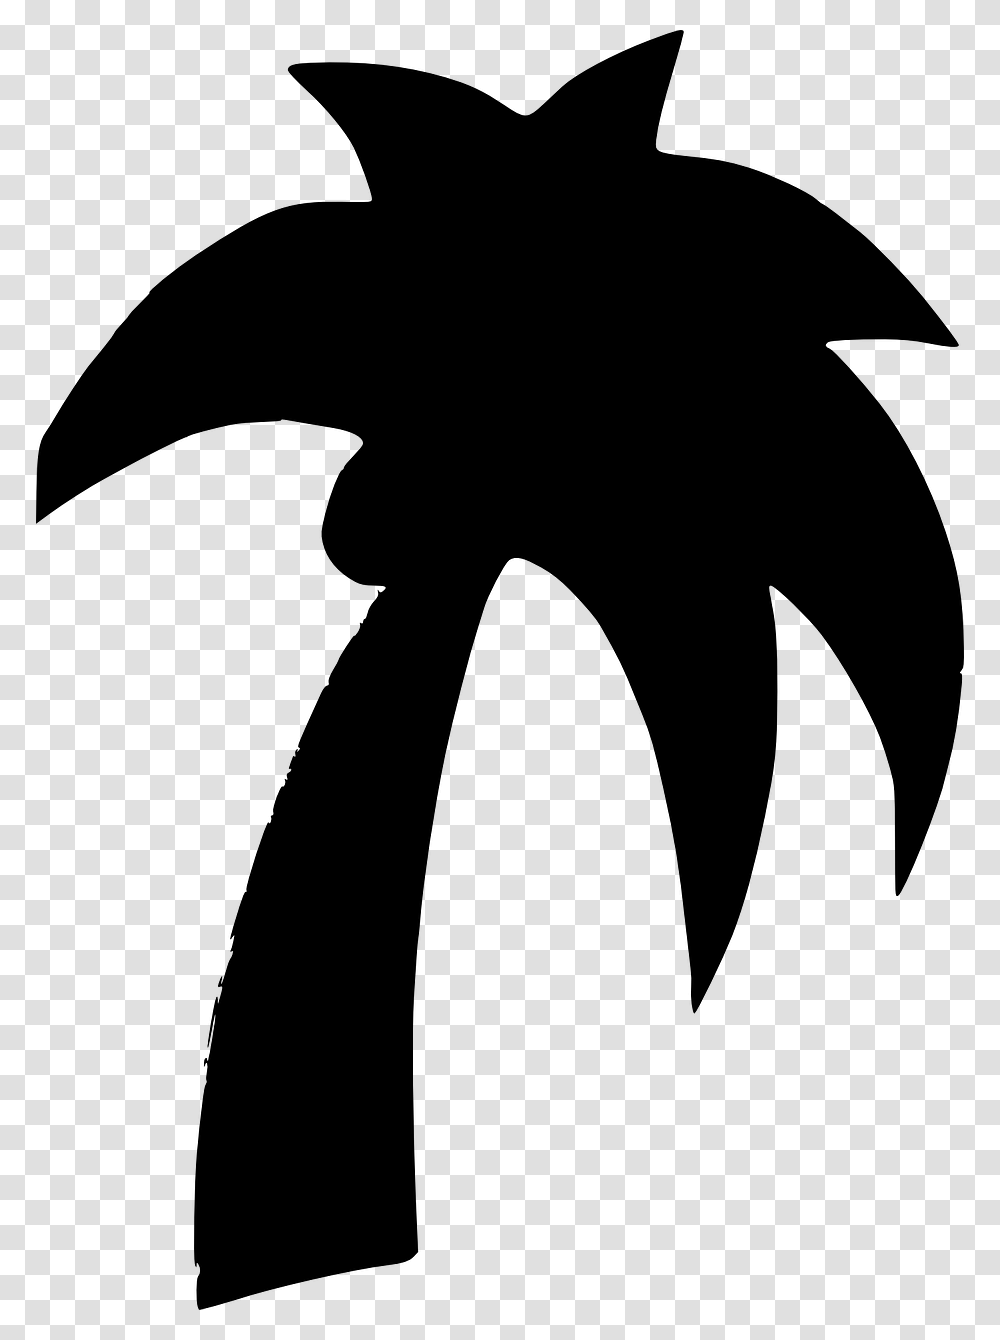 Shapes Clipart Vector Clip Art Online Royalty Free Palm Tree Clip Art Black, Gray, World Of Warcraft Transparent Png